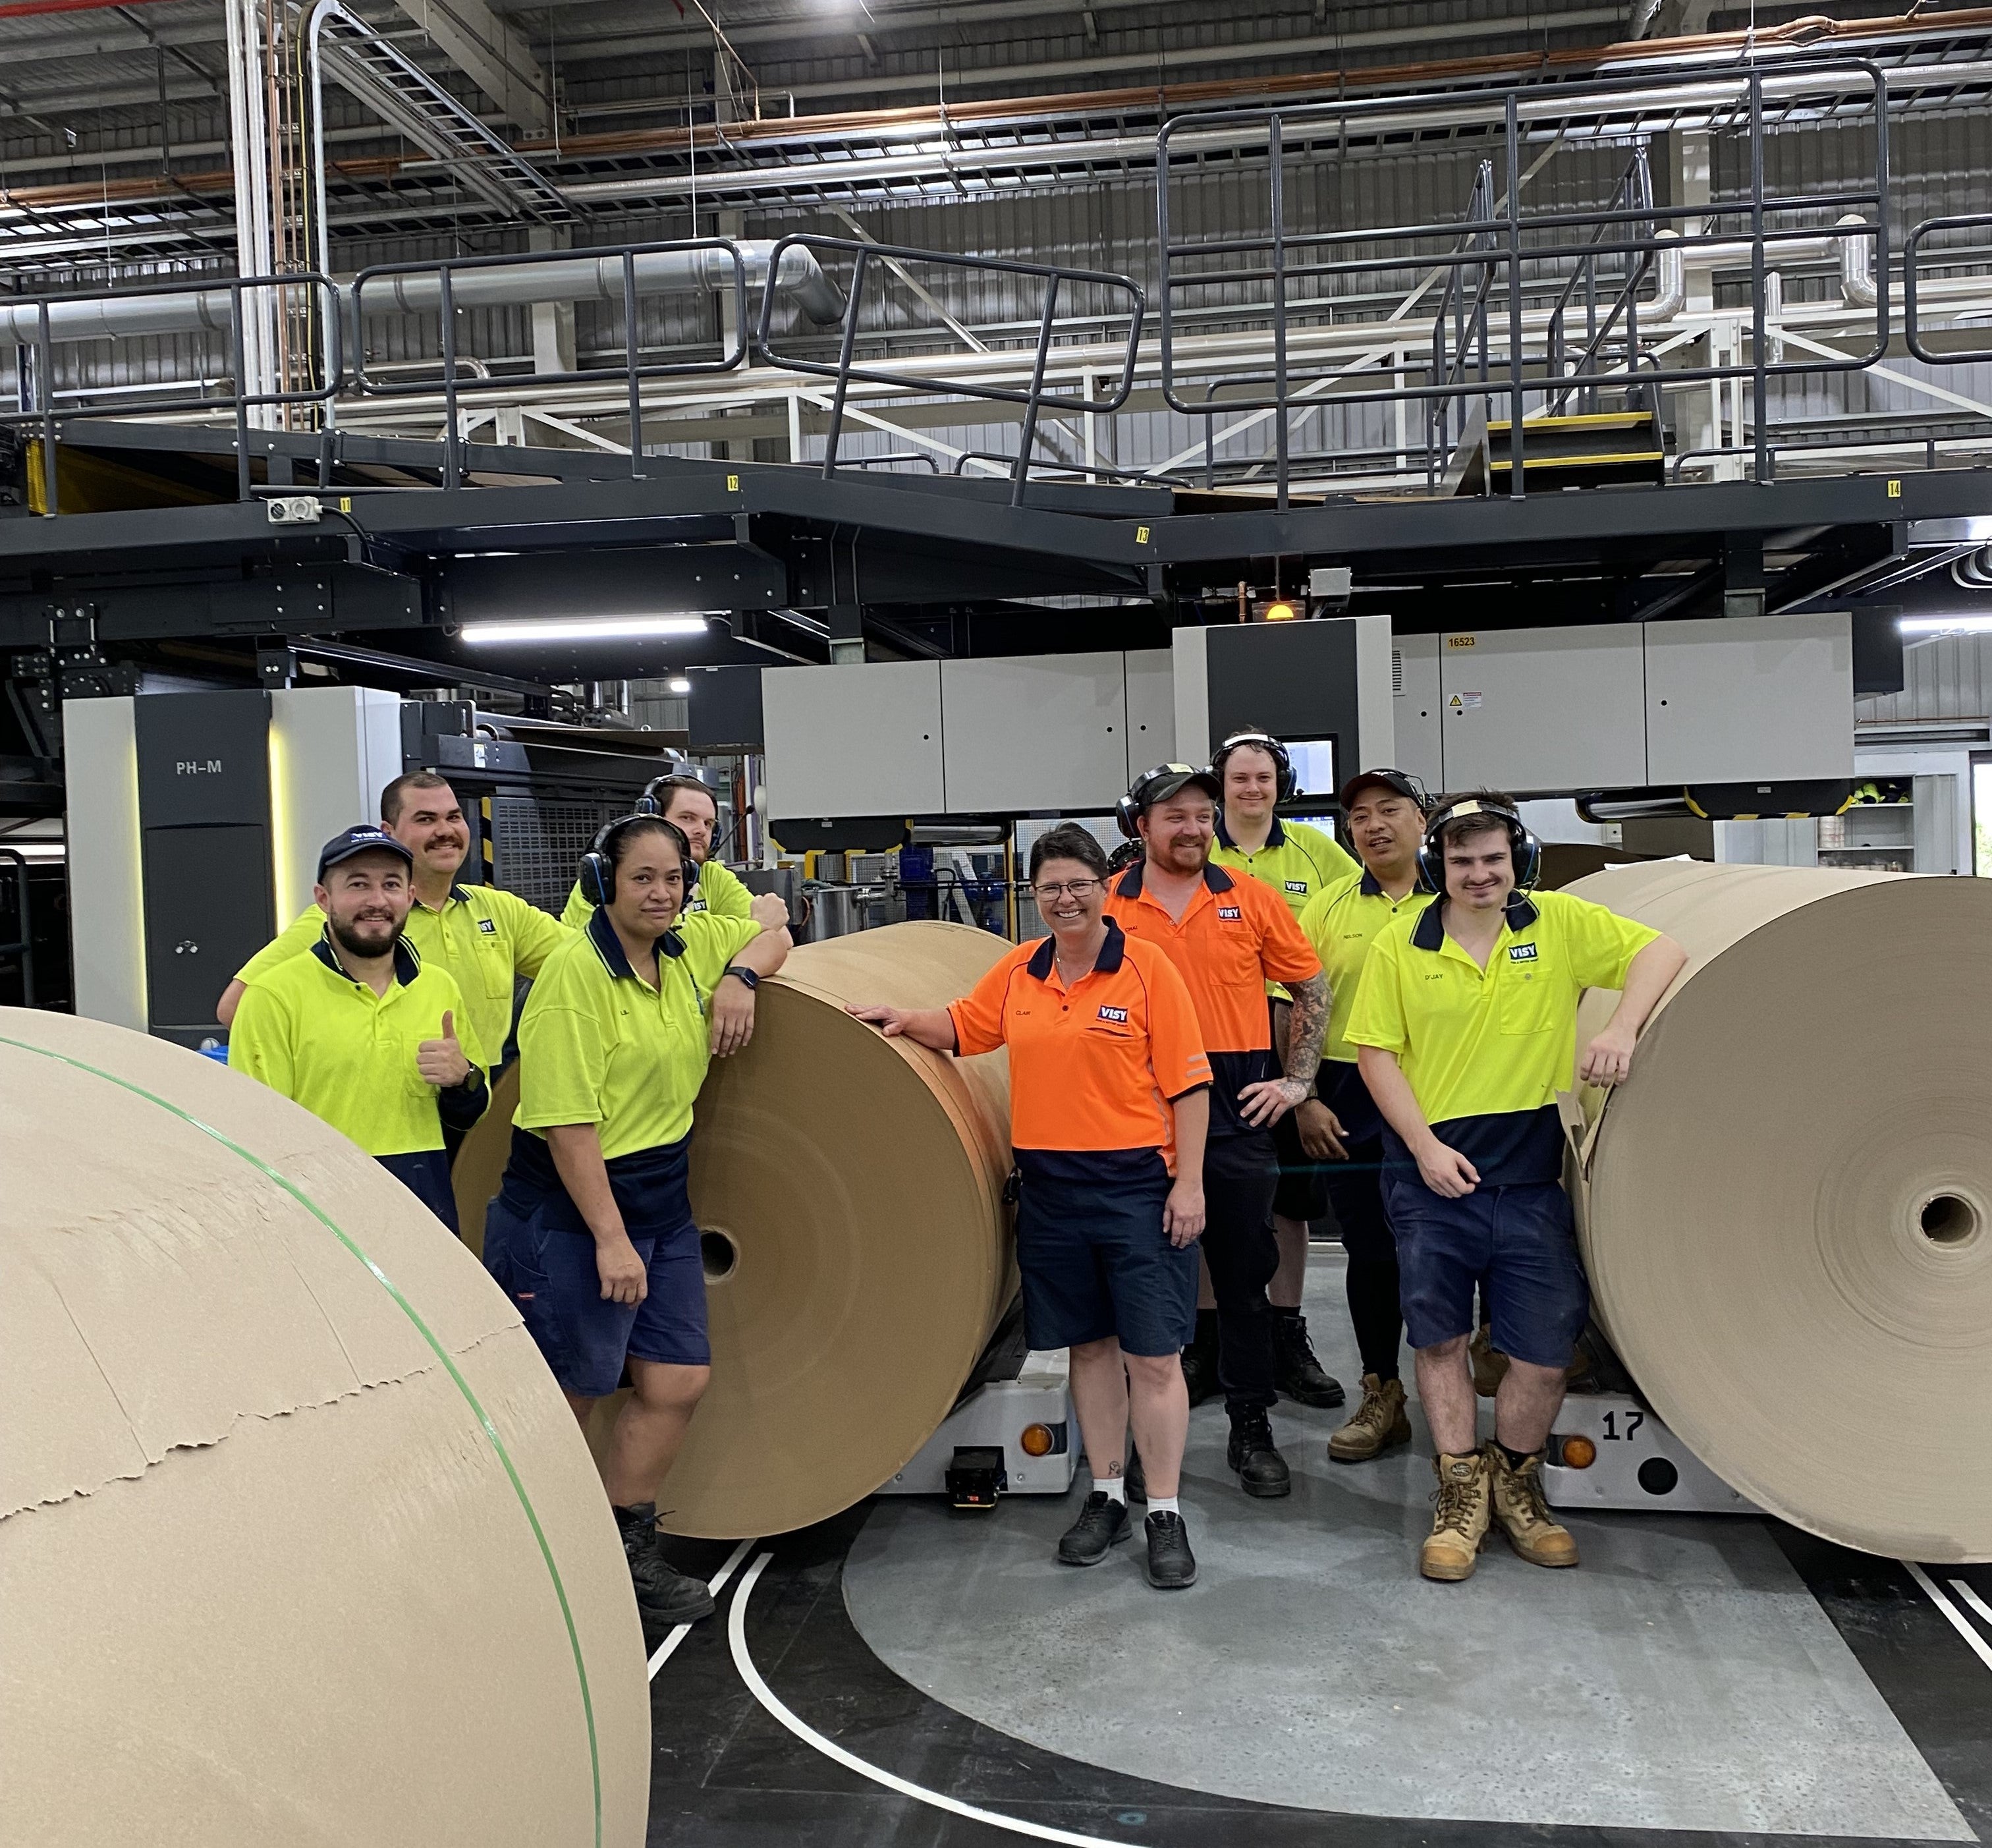 Nine people in high visibility safety vests, standing between paper reels are smiling at the camera